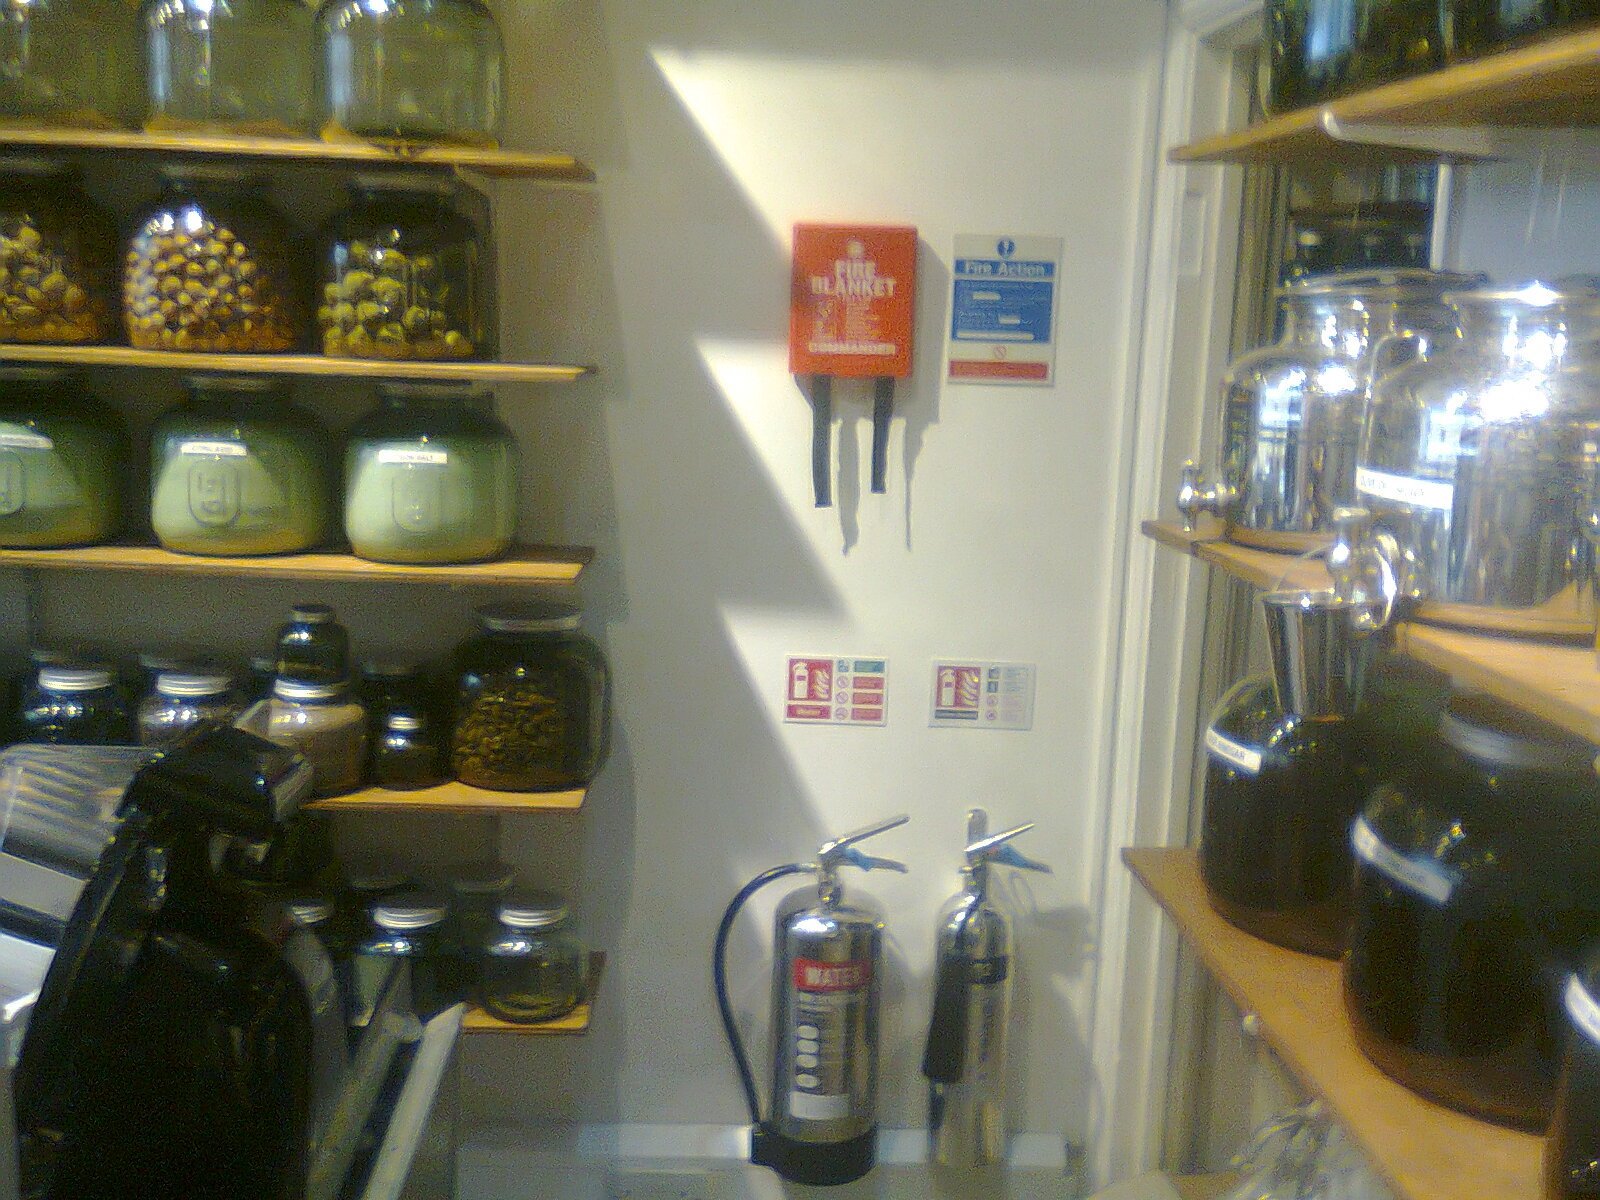 Fire Extinguisher Fitting to Wall & Installation to meet BS 5306-8: 2012